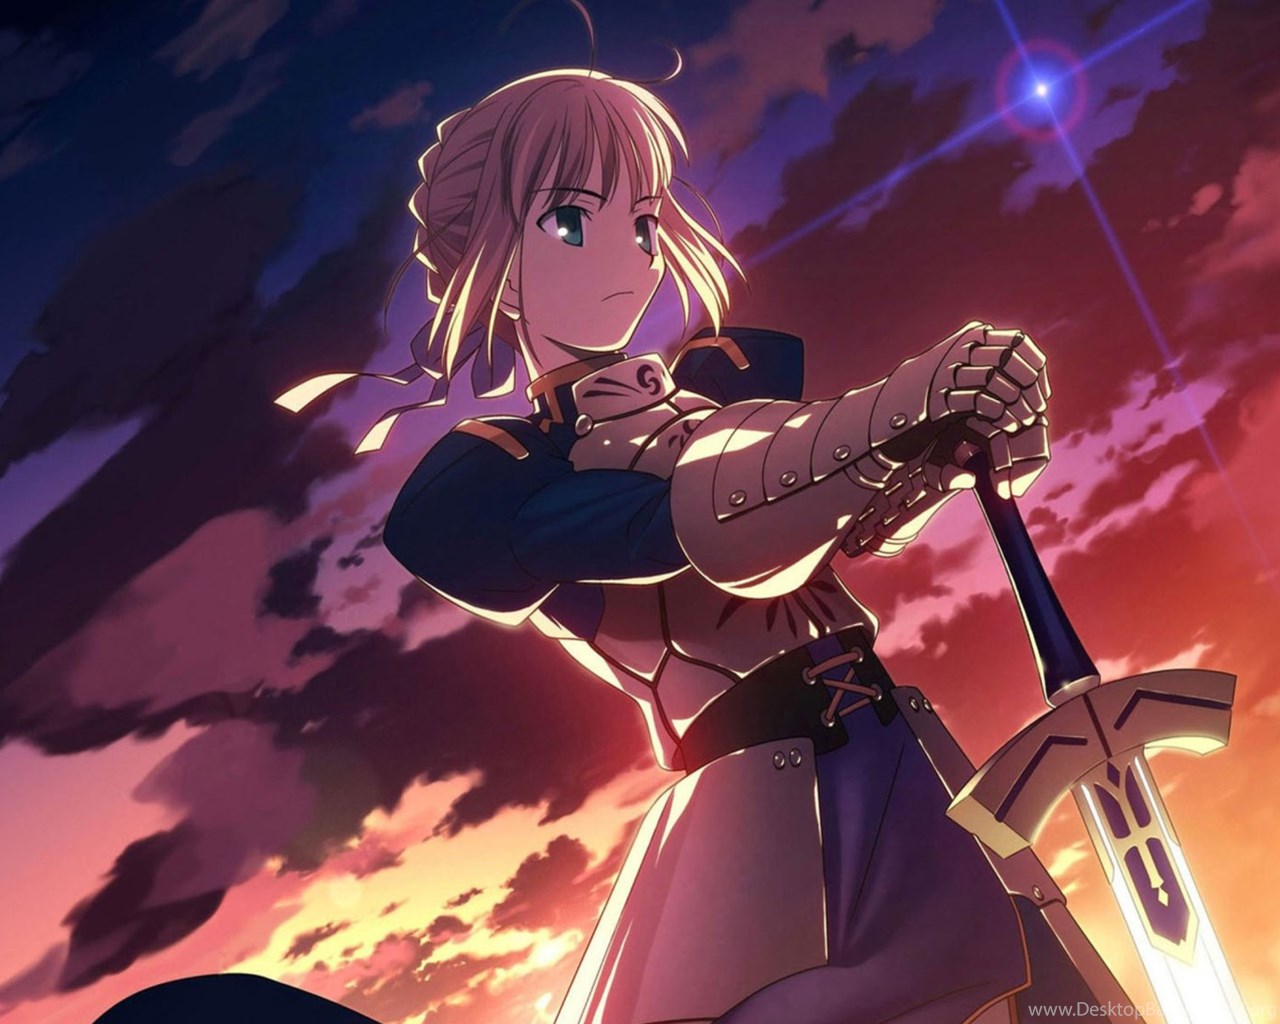 Saber From Fate Stay Night Wallpapers For Widescreen Desktop Pc Desktop Background